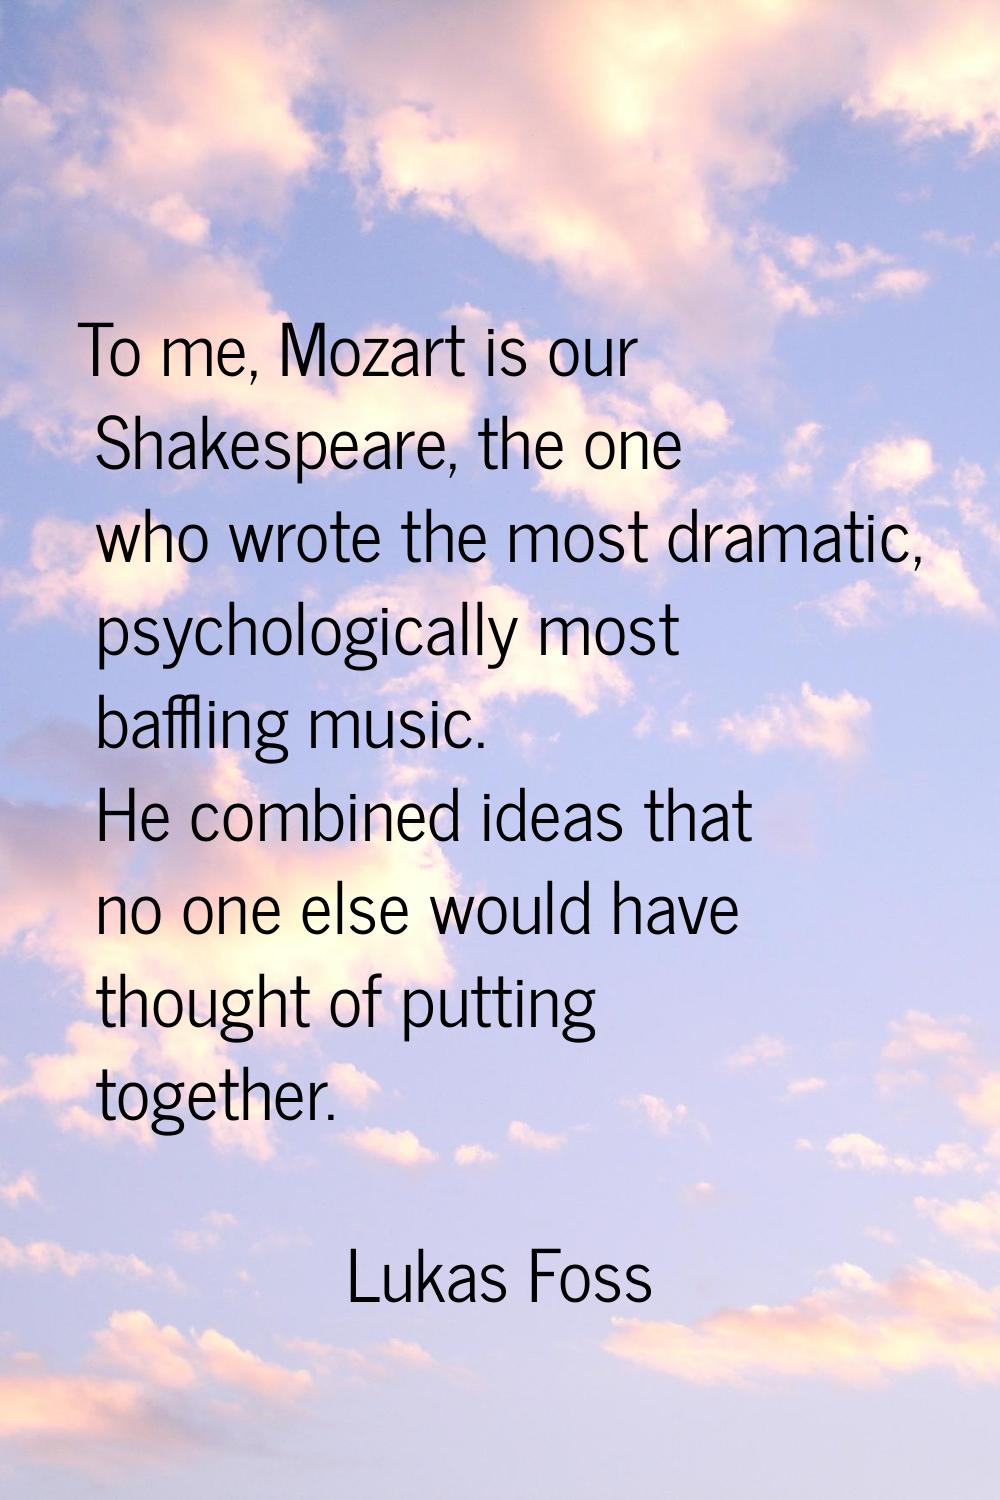 To me, Mozart is our Shakespeare, the one who wrote the most dramatic, psychologically most bafflin